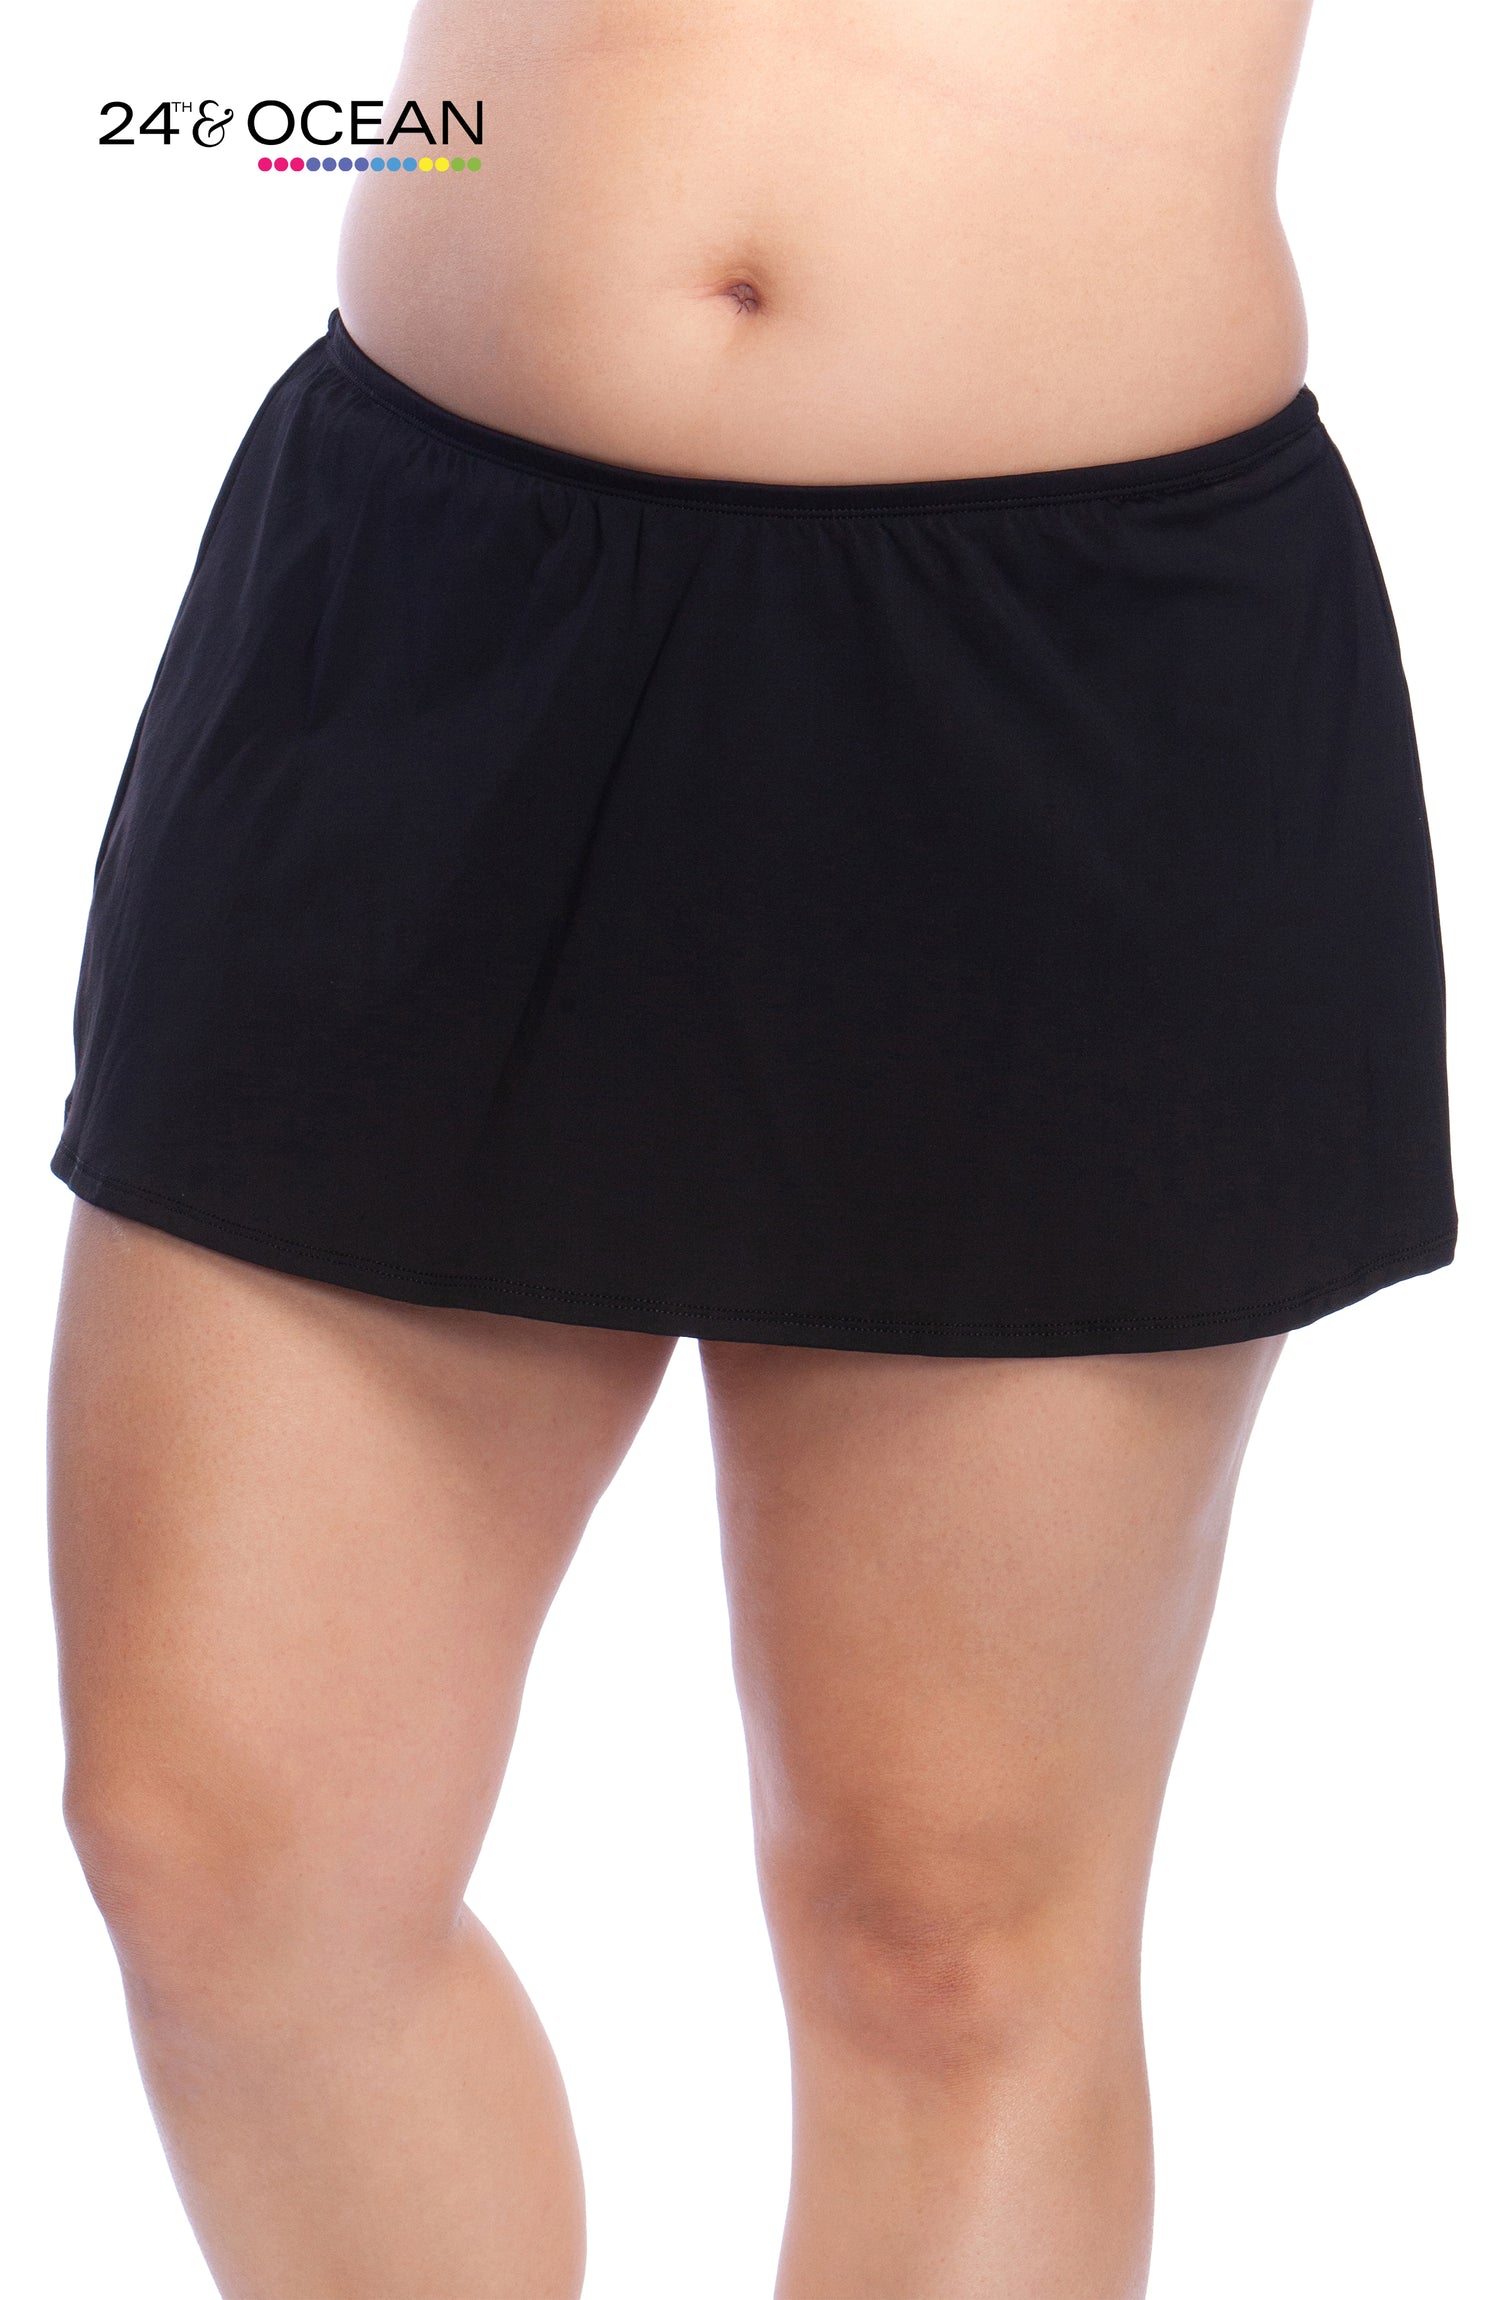 Model is wearing a solid black colored skirted hipster bottom from our 24th & Ocean brand.